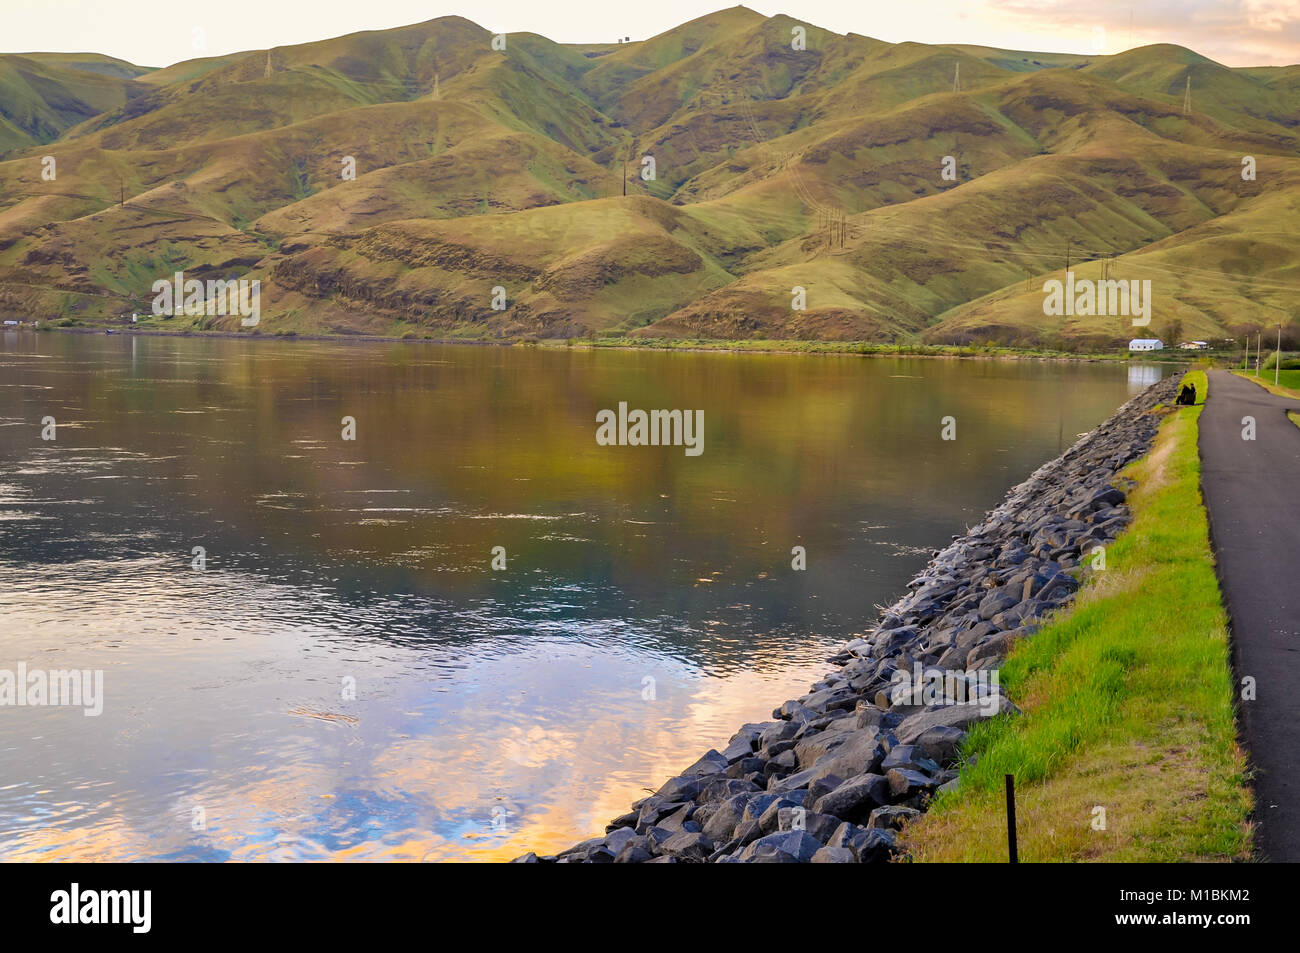 Lake at the base of foothills with promenade Stock Photo